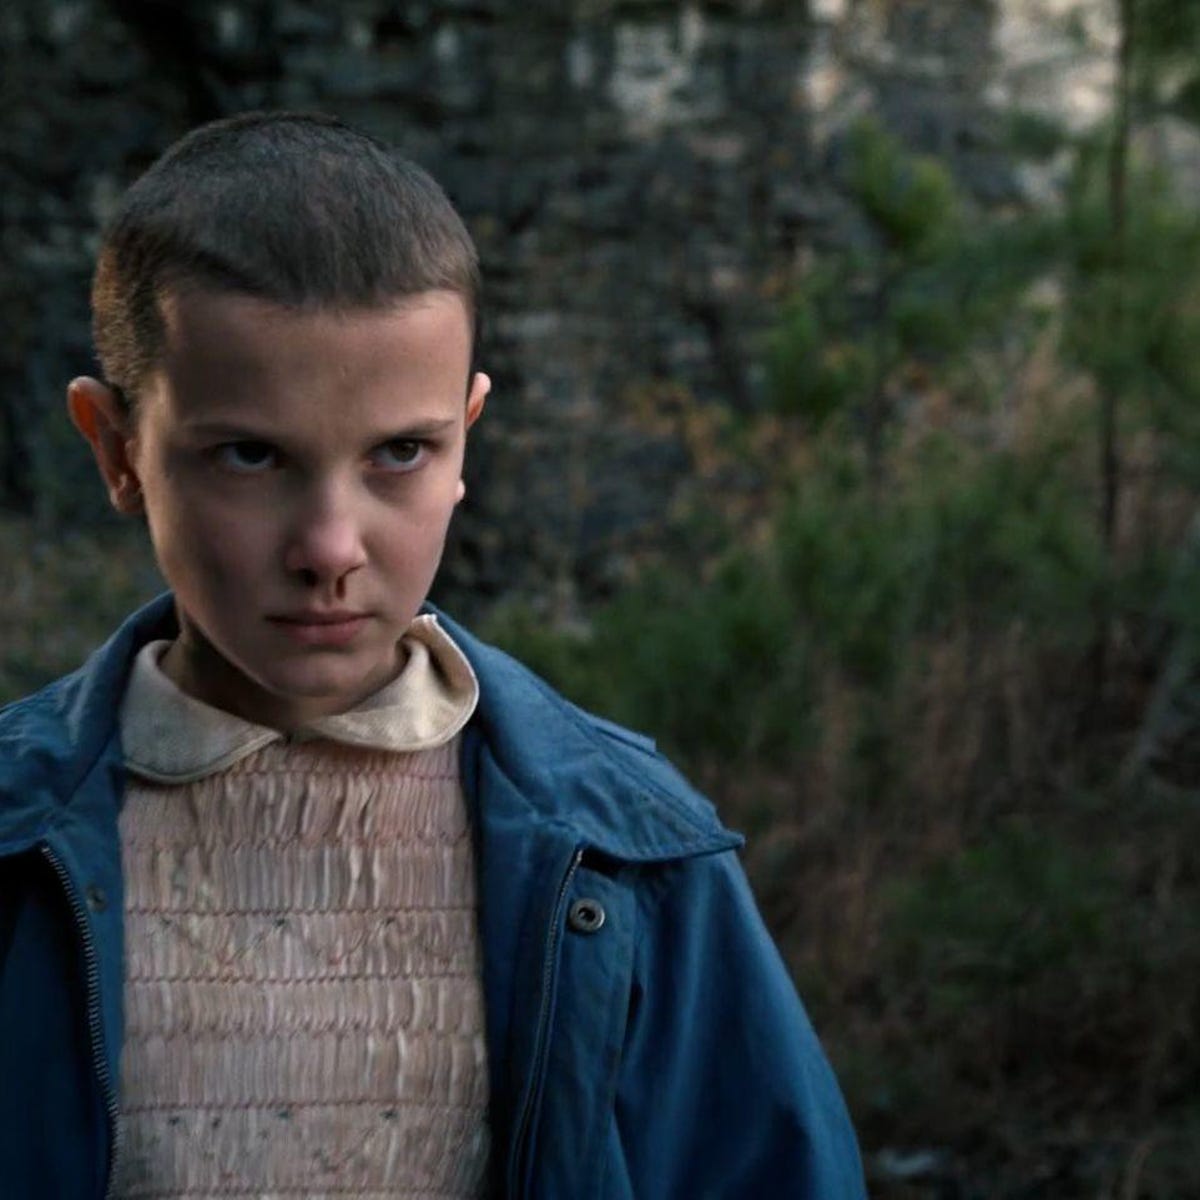 Stranger Things recap: Everything you need to know from season 1